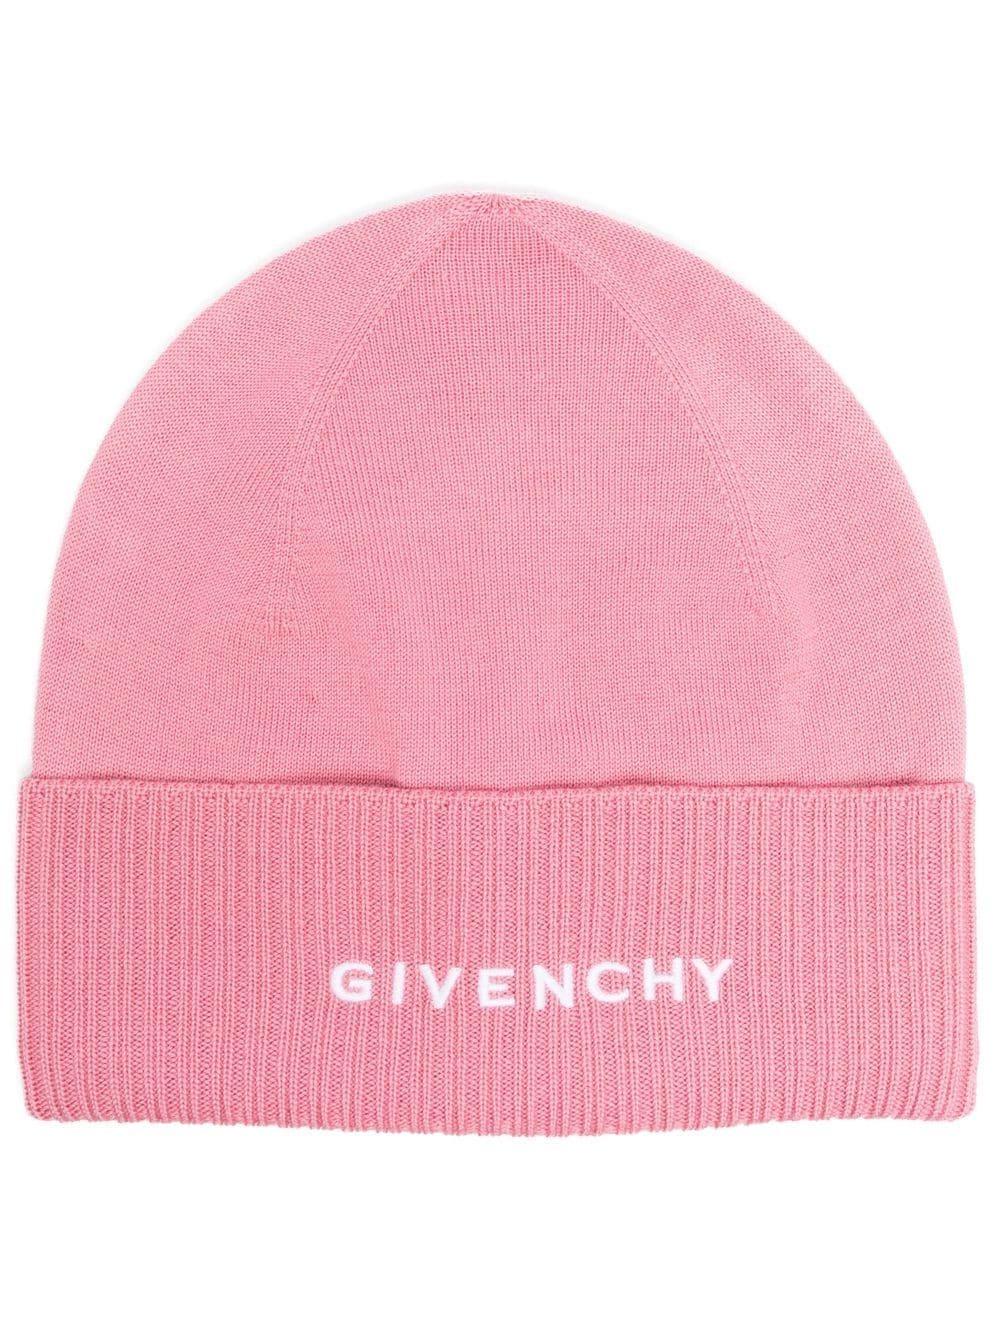 Givenchy Hats in Pink | Lyst